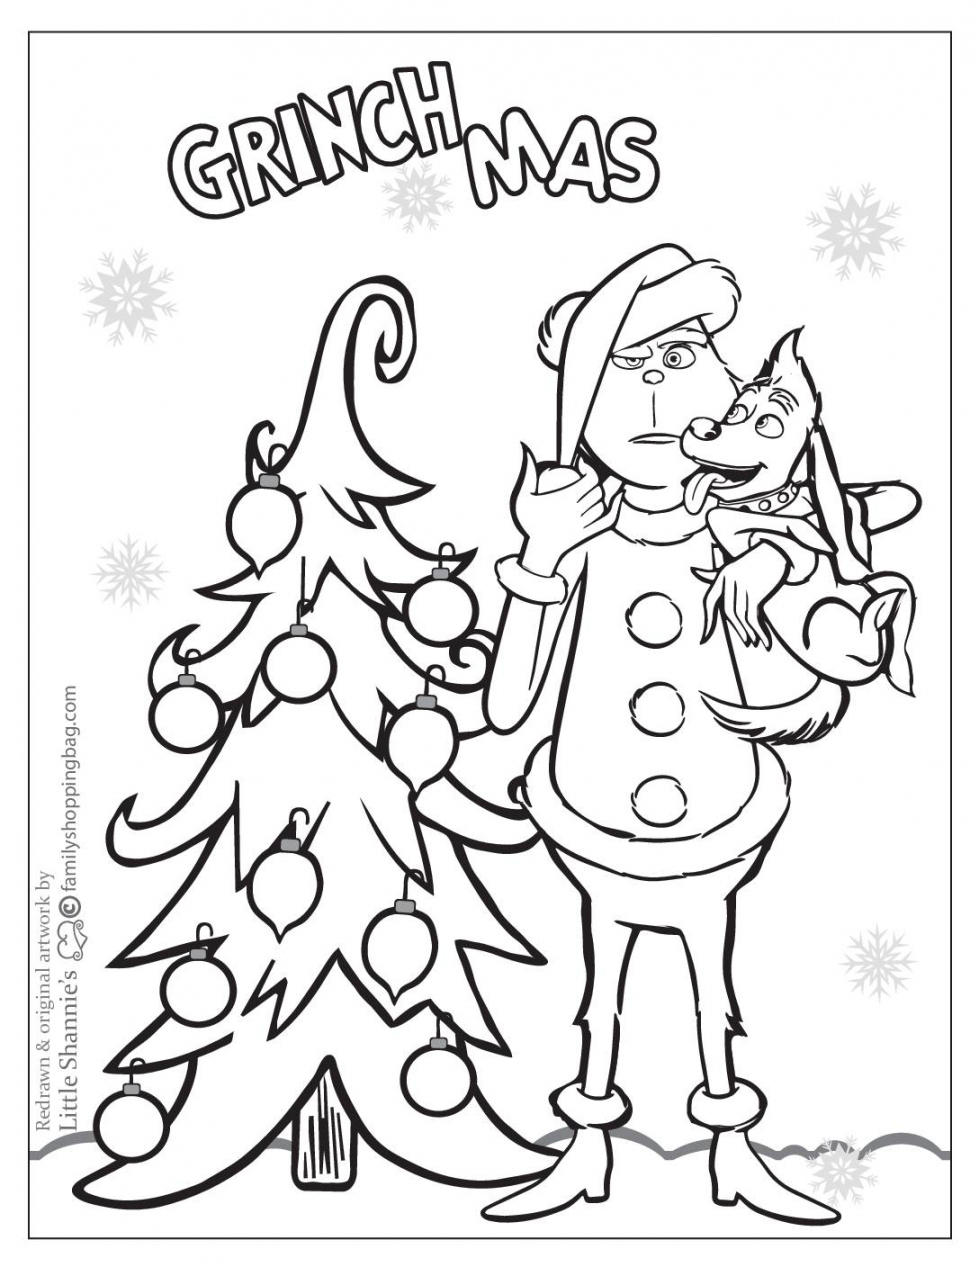 Coloring Page Grinch - FREE Printables - Free Printable Grinch Coloring Page